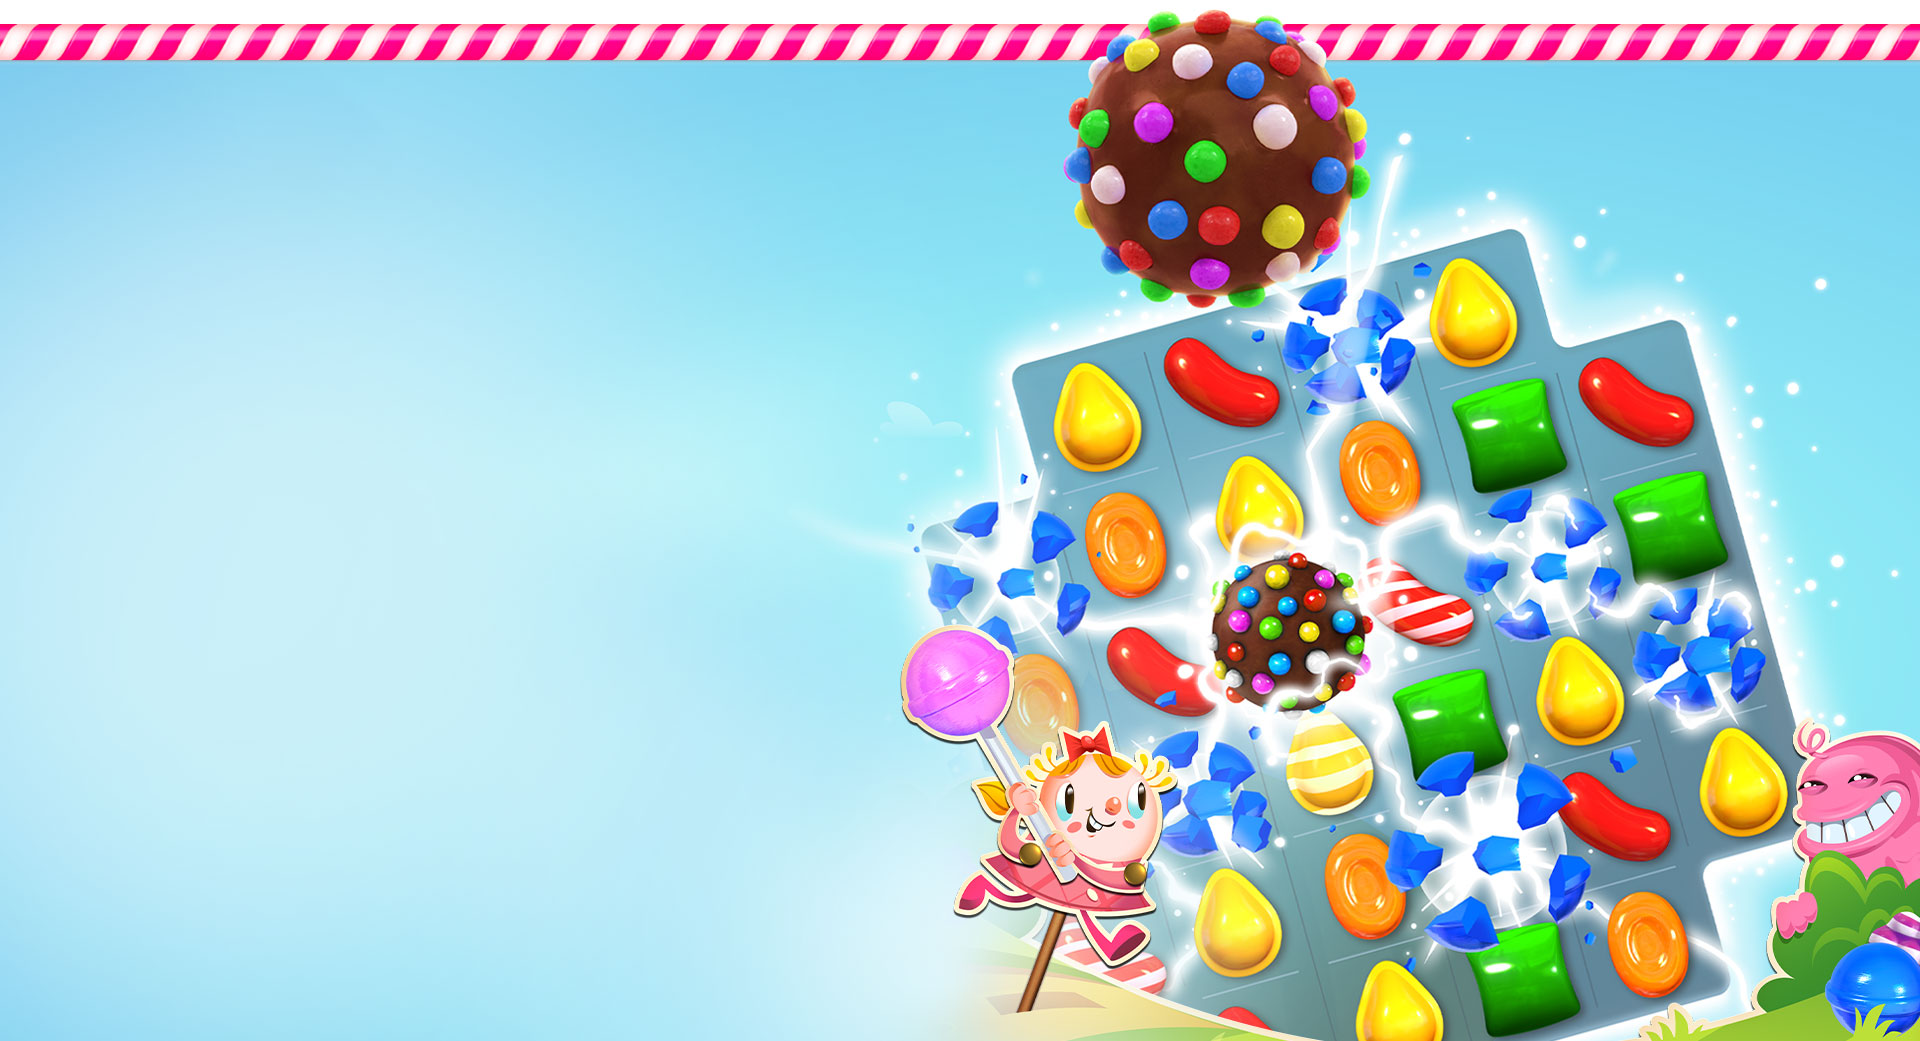 A Colour Bomb bursts all the Blue Candies on a Candy Crush map as Tiffi and the Bubblegum Troll frolic in the foreground.